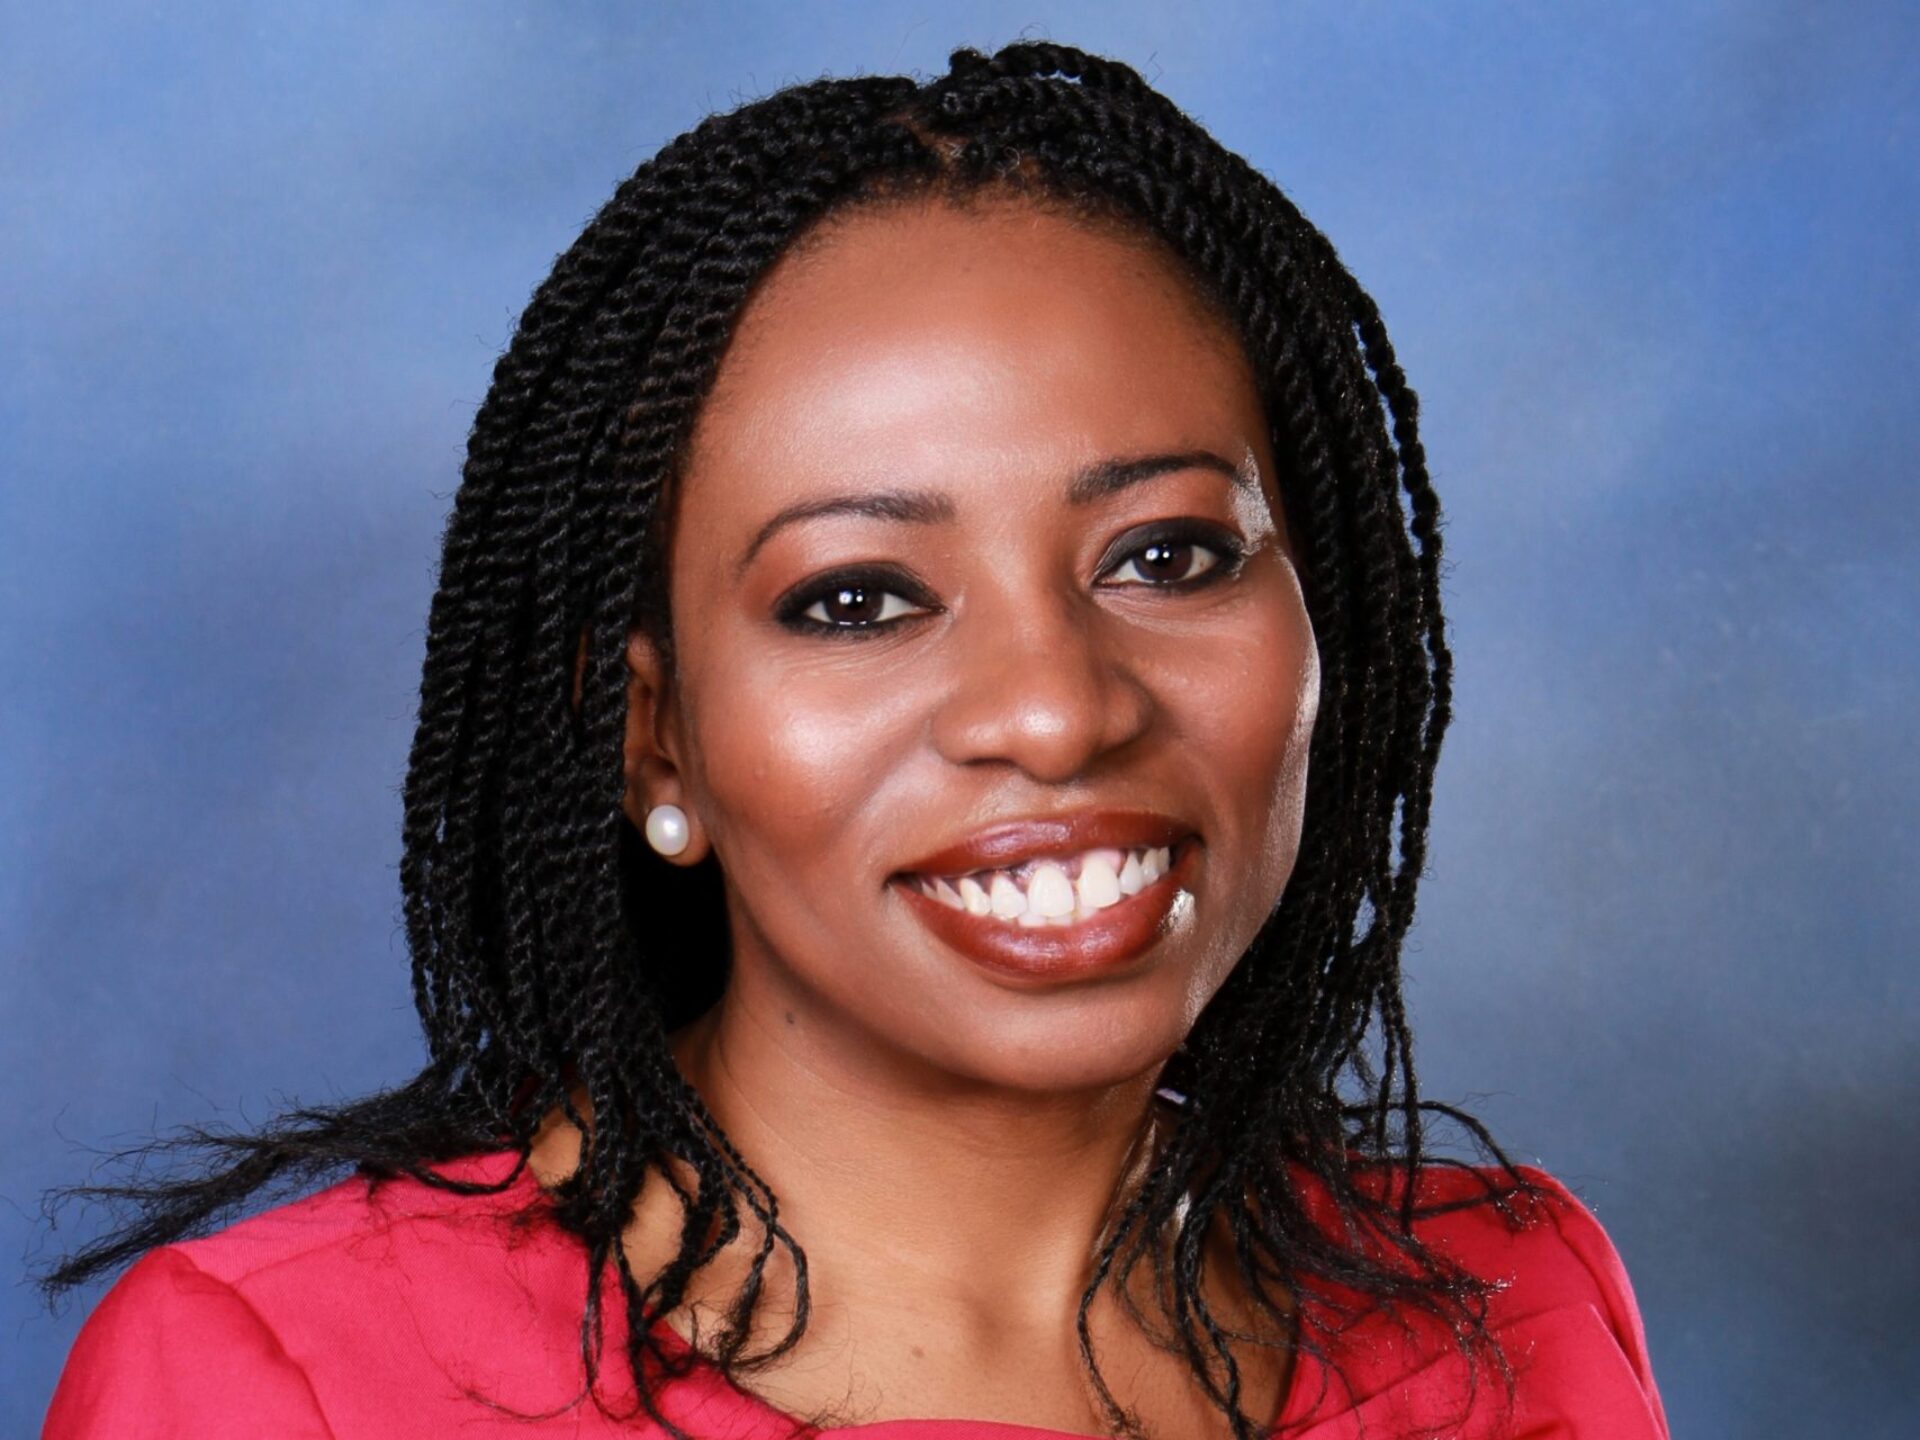 Portrait of Cynthia Akatugba, wearing a pink shirt with a bow on it.